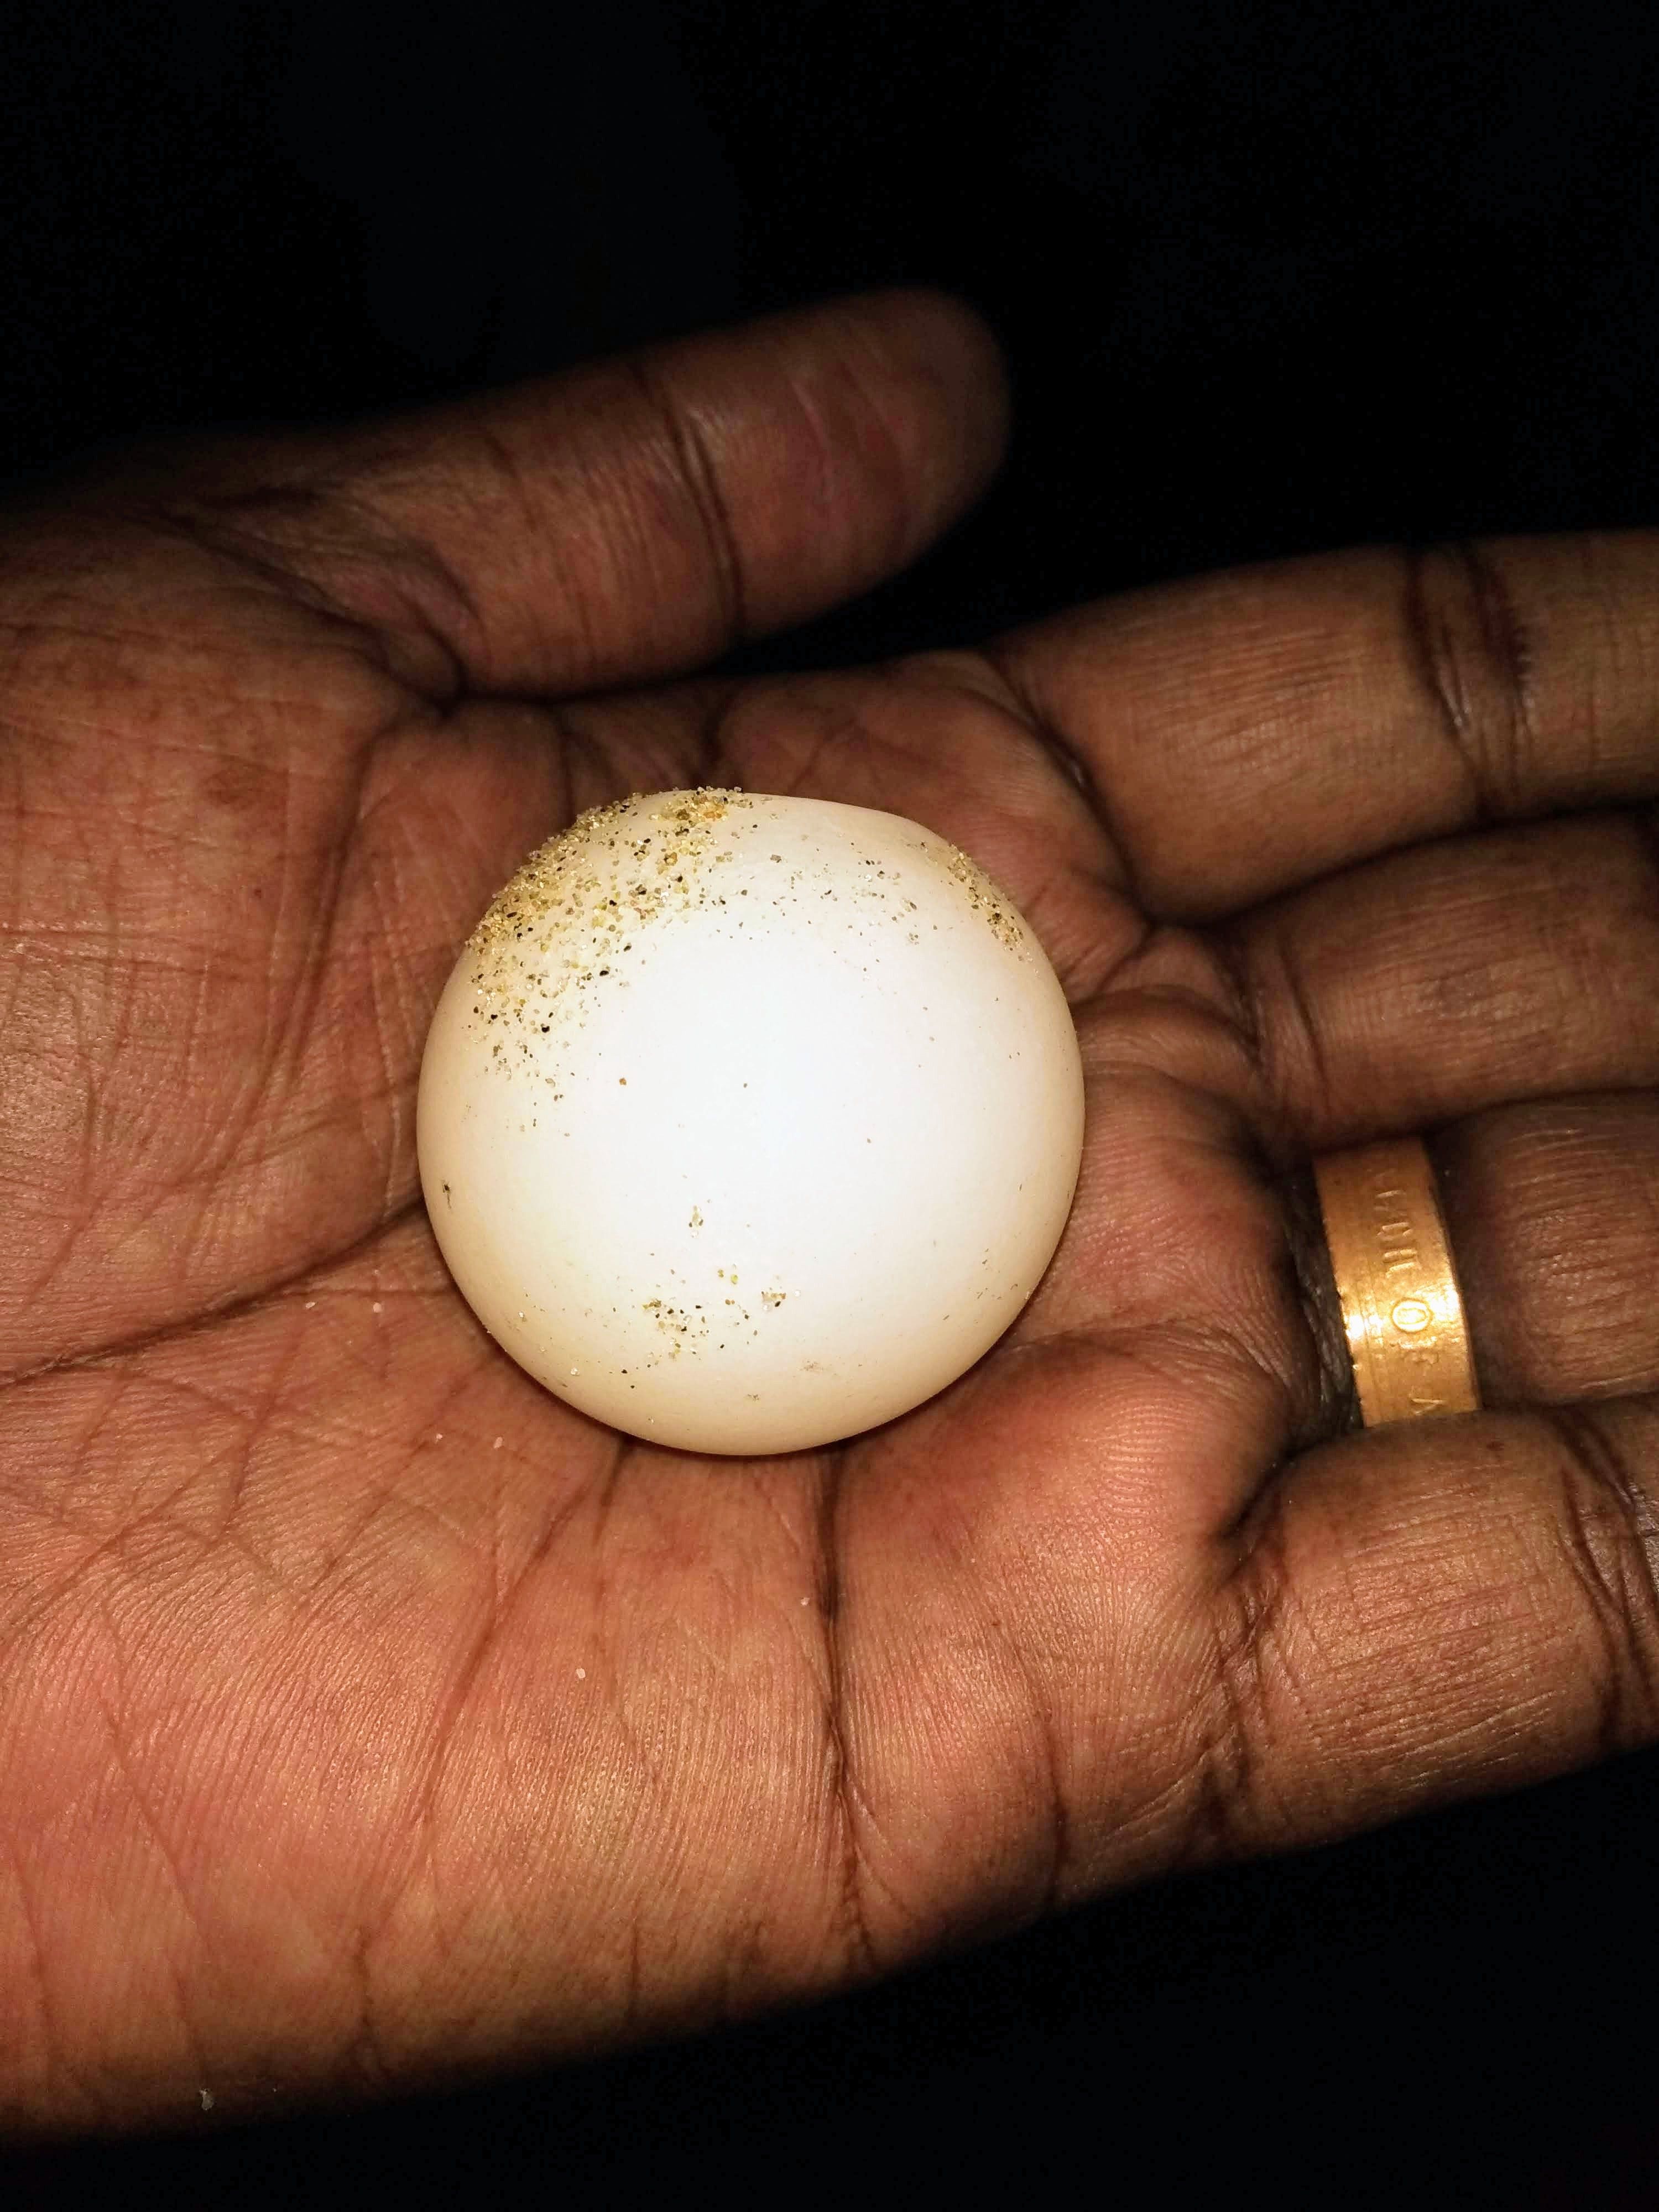 Olive Ridley turtles' tender eggs holding in my hands